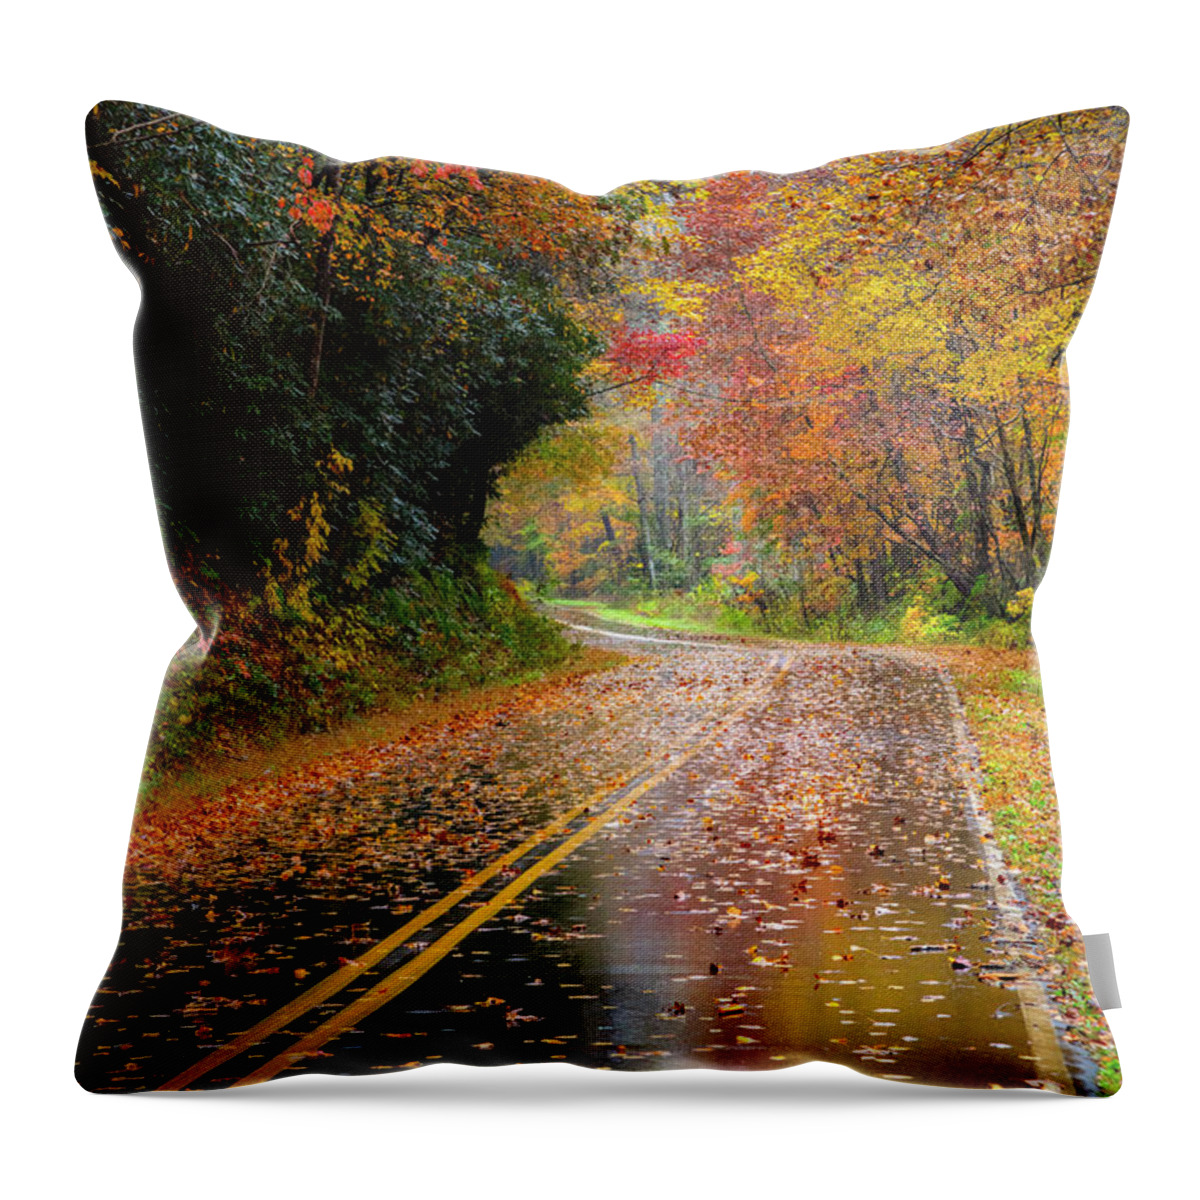 Carolina Throw Pillow featuring the photograph Autumn Drive II by Debra and Dave Vanderlaan